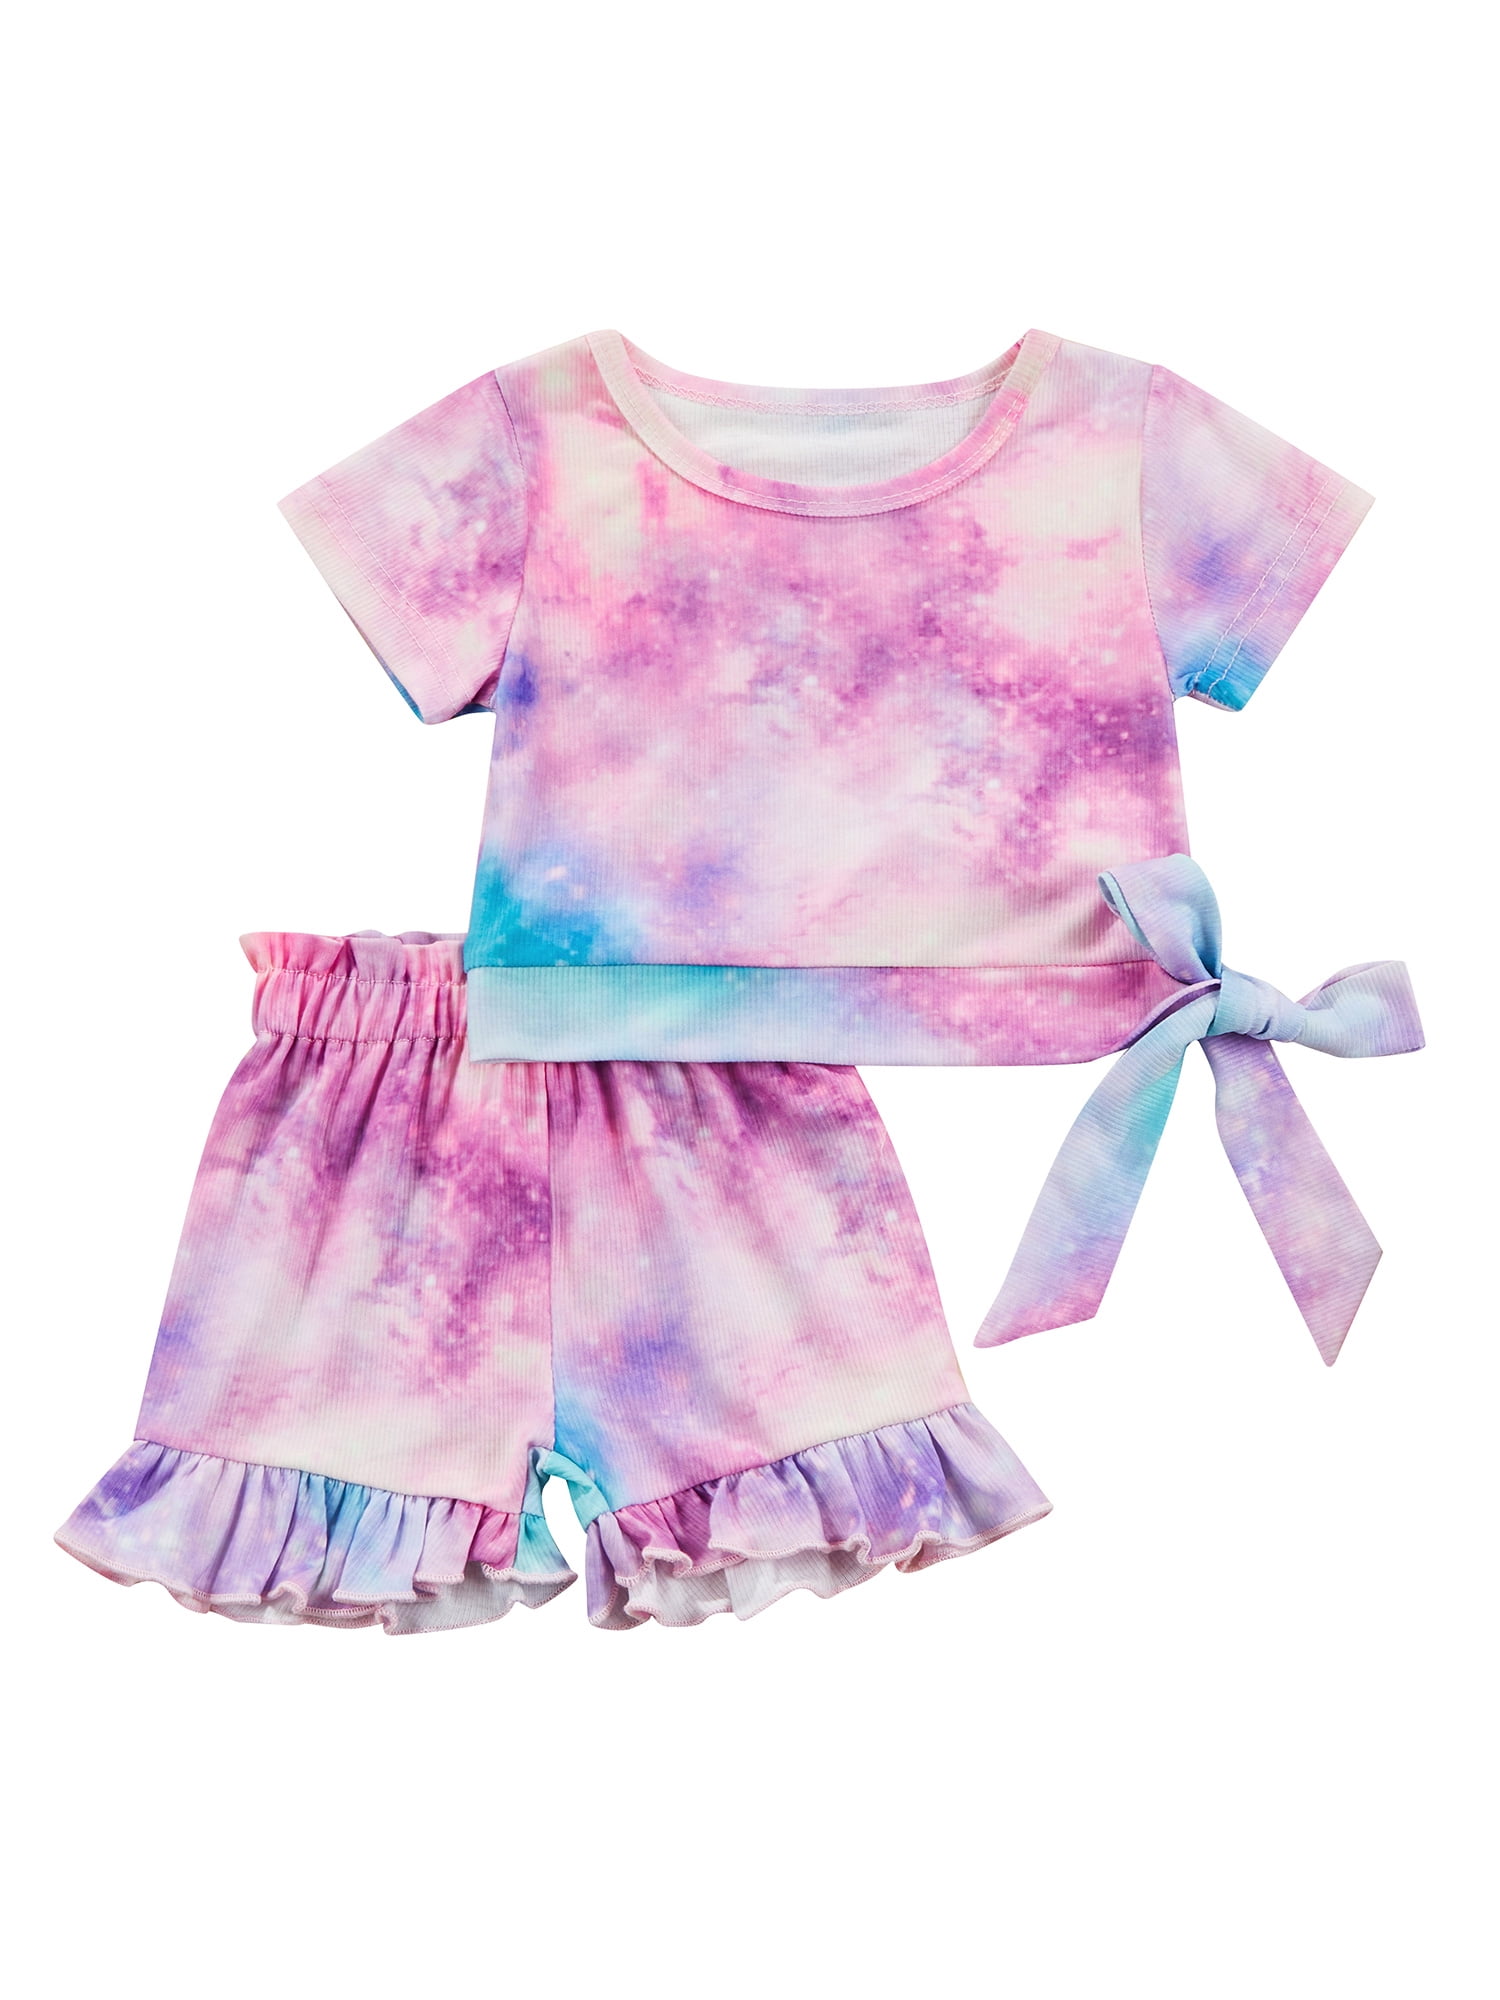 Pants Clothes Set Infant Tracksuit Kids Baby Girls Outfits Tie-Dye Ruffle Tops 